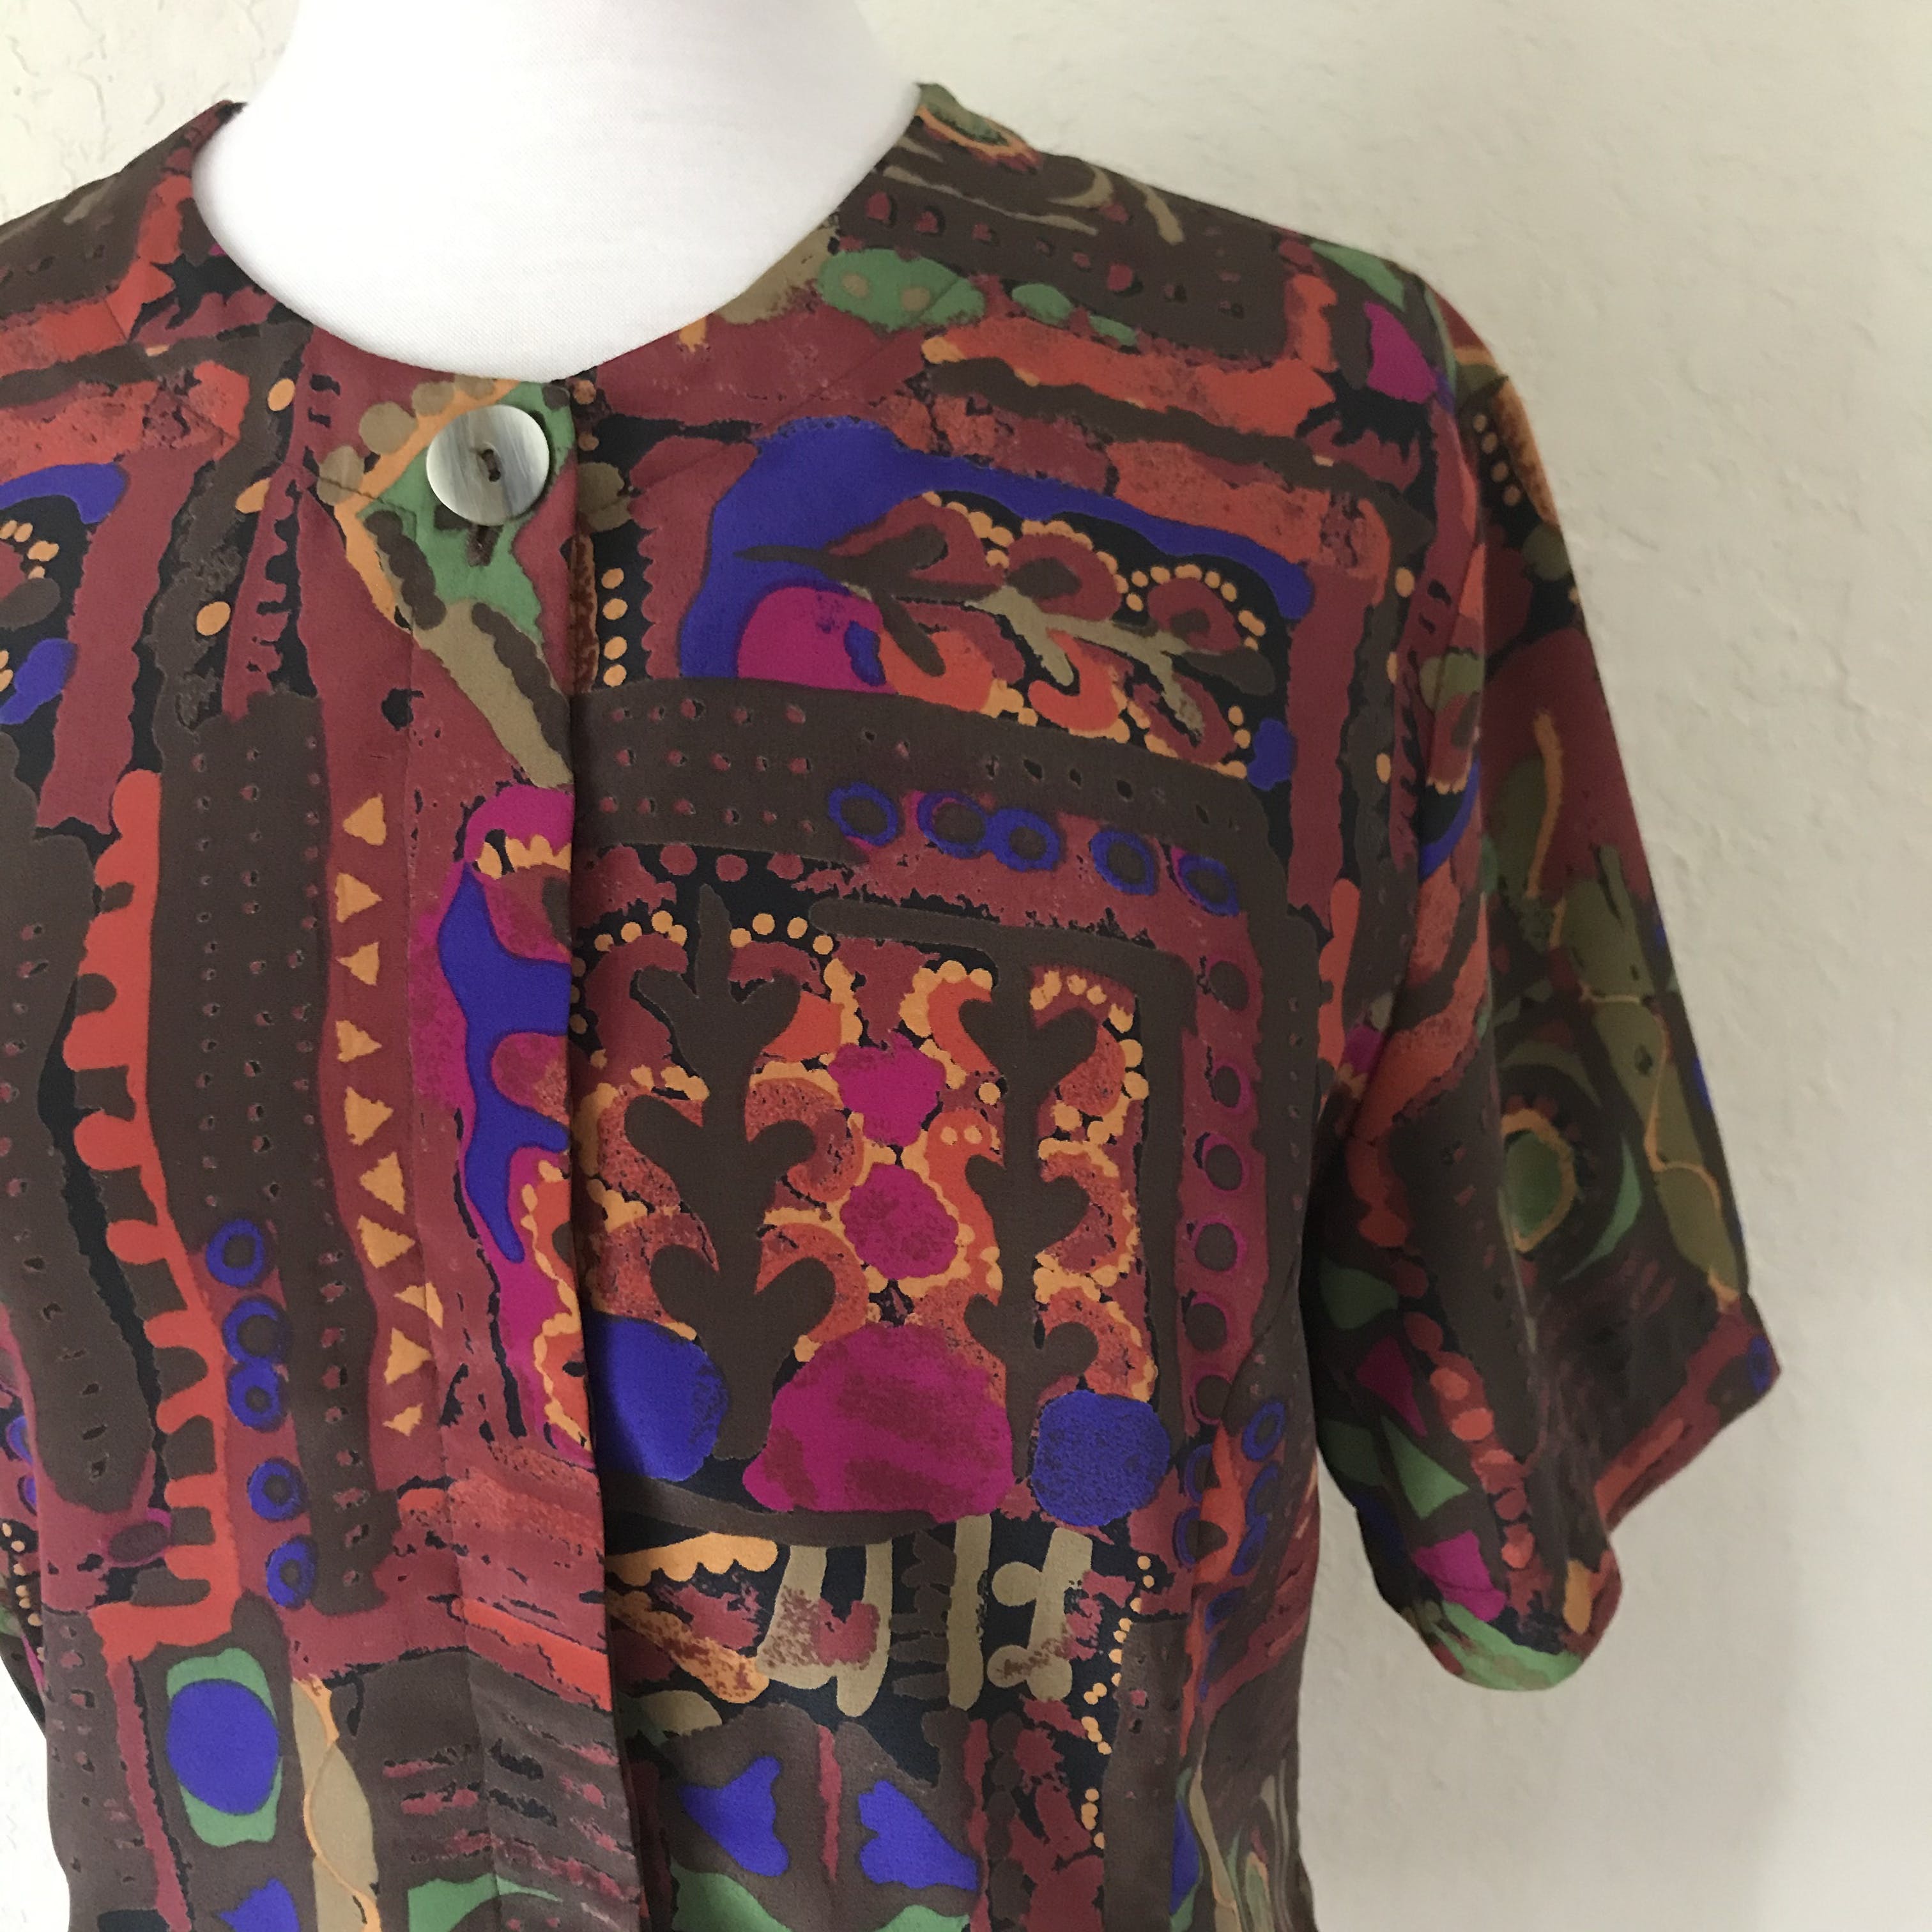 Vintage 90’s Abstract Patterned Blouse by Bora Bora | Shop THRILLING